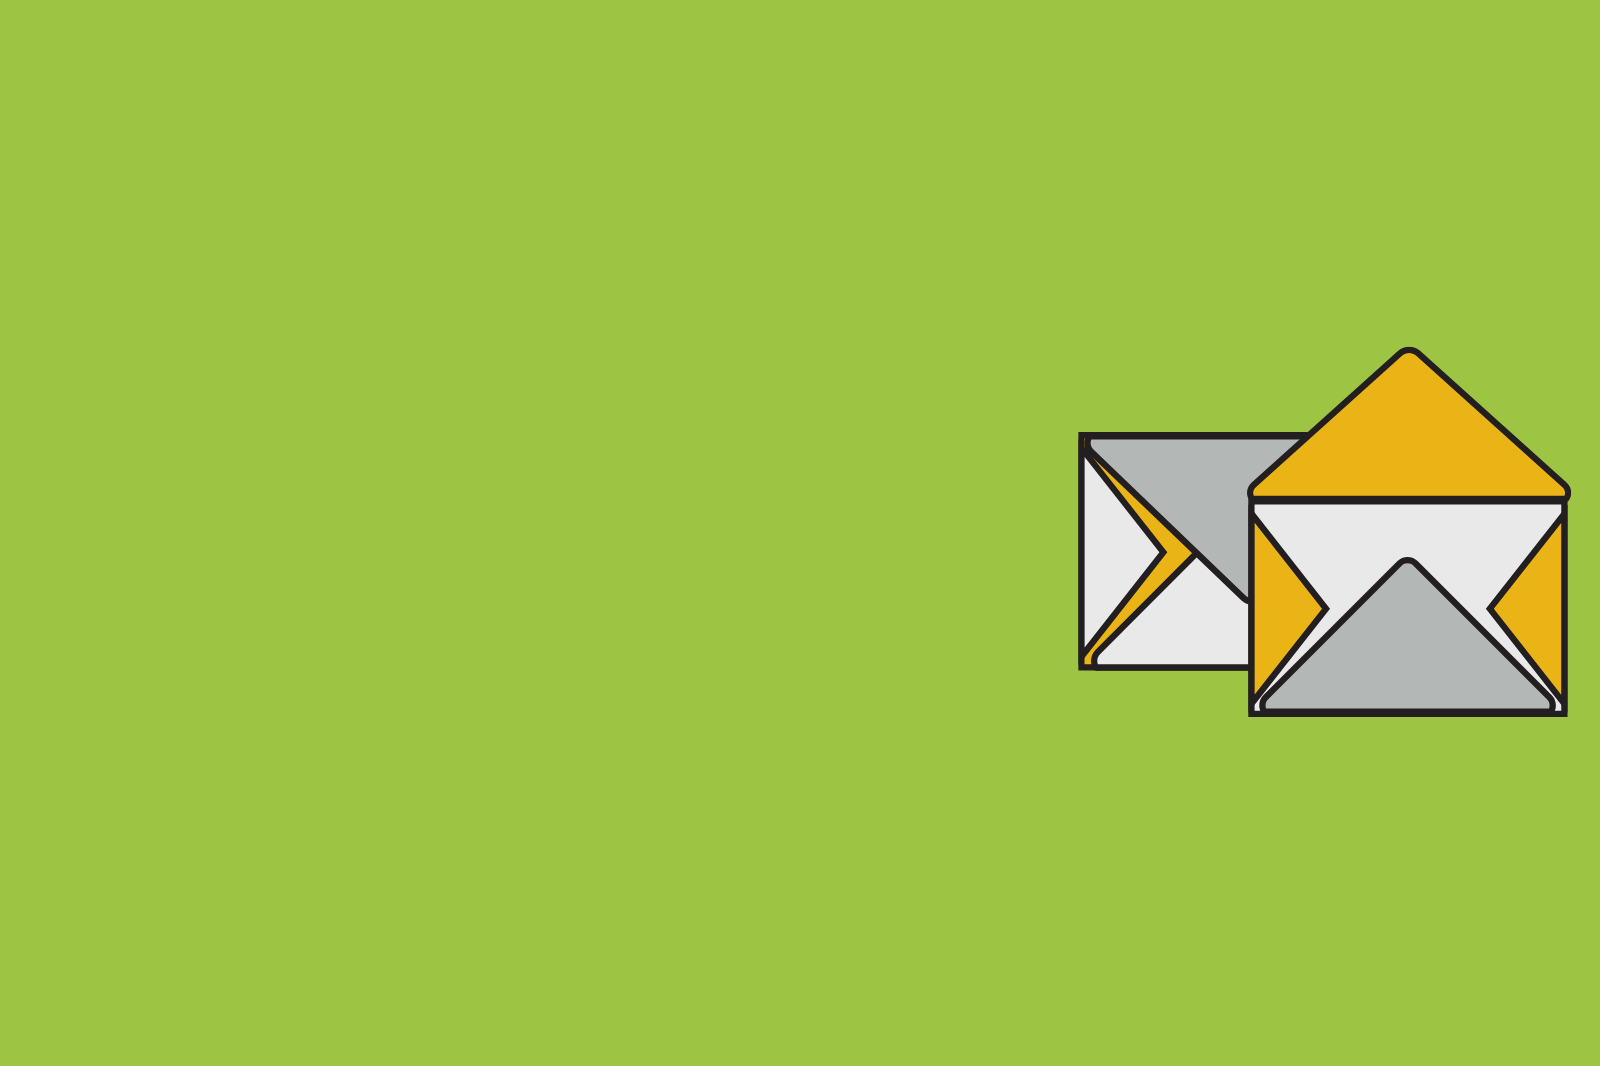 An icon of an envelope on a green background providing 10 Tips for Direct Mail Success.